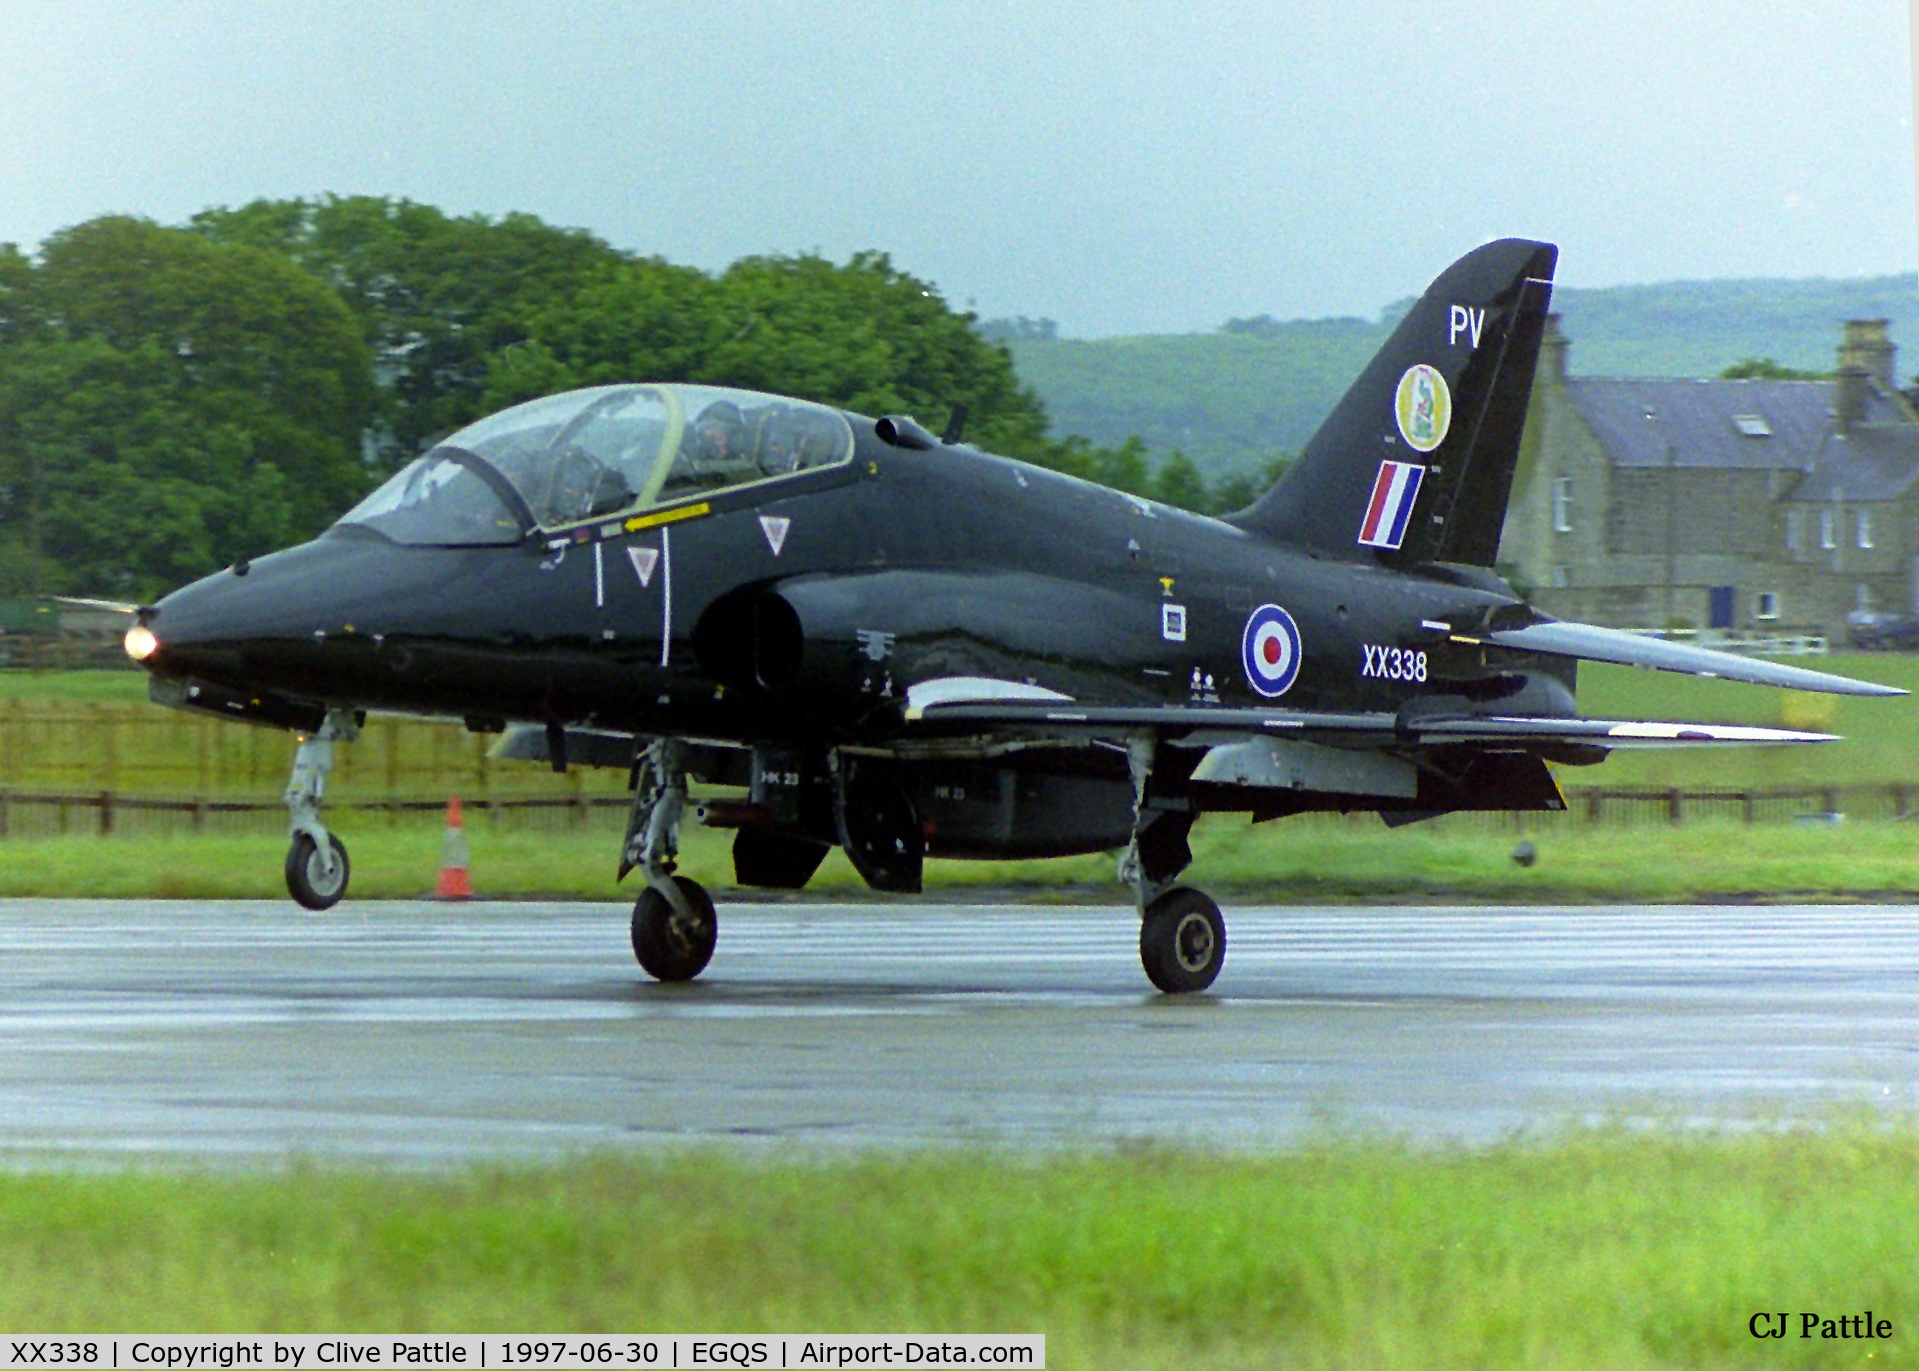 XX338, 1981 Hawker Siddeley Hawk T.1A C/N 187/312162, Nose wheel about to touch whilst landing at RAF Lossiemouth (EGQS) in June 1997 whilst participating in the bi-annual TLT (Tactical Leaders Training) course, whilst serving with 19 R Sqn RAF coded 'PV'